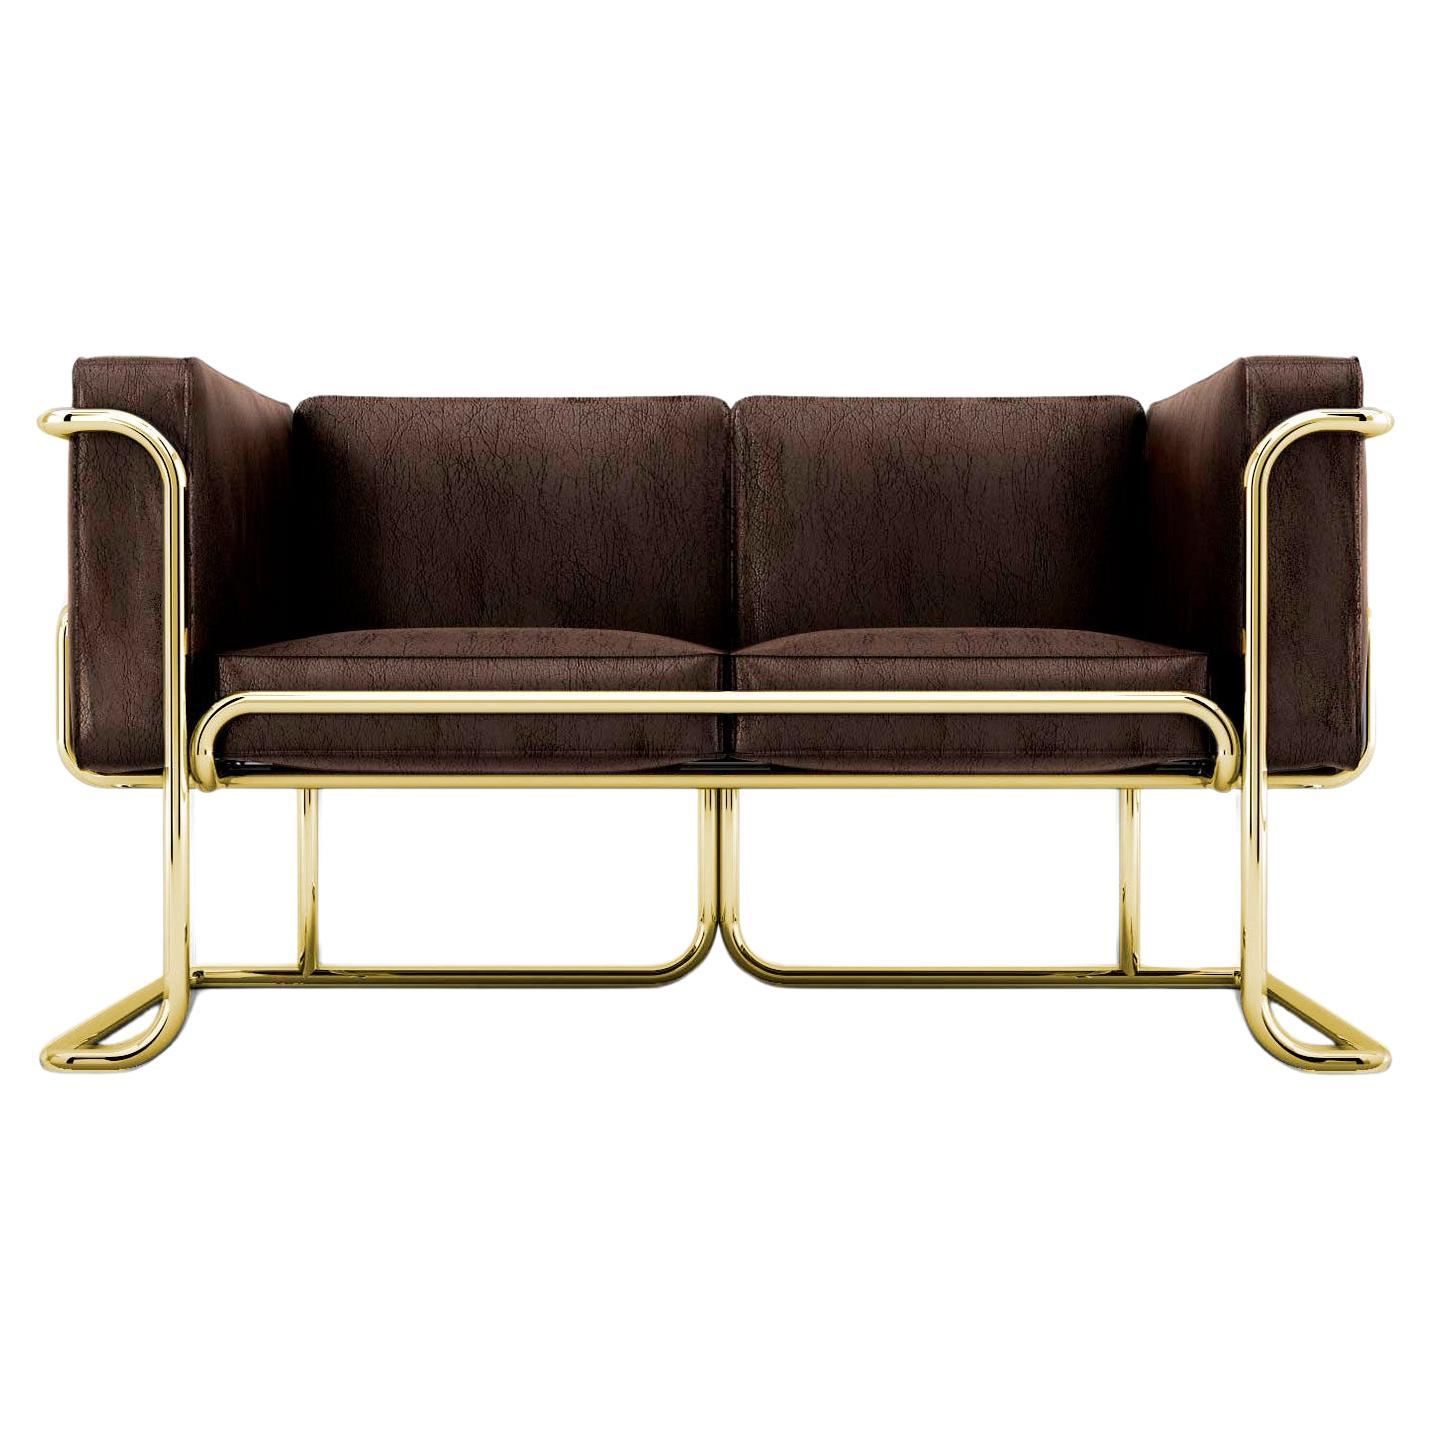 Lotus 2 Seat Sofa - Modern Brown Leather Sofa with Brass Legs For Sale